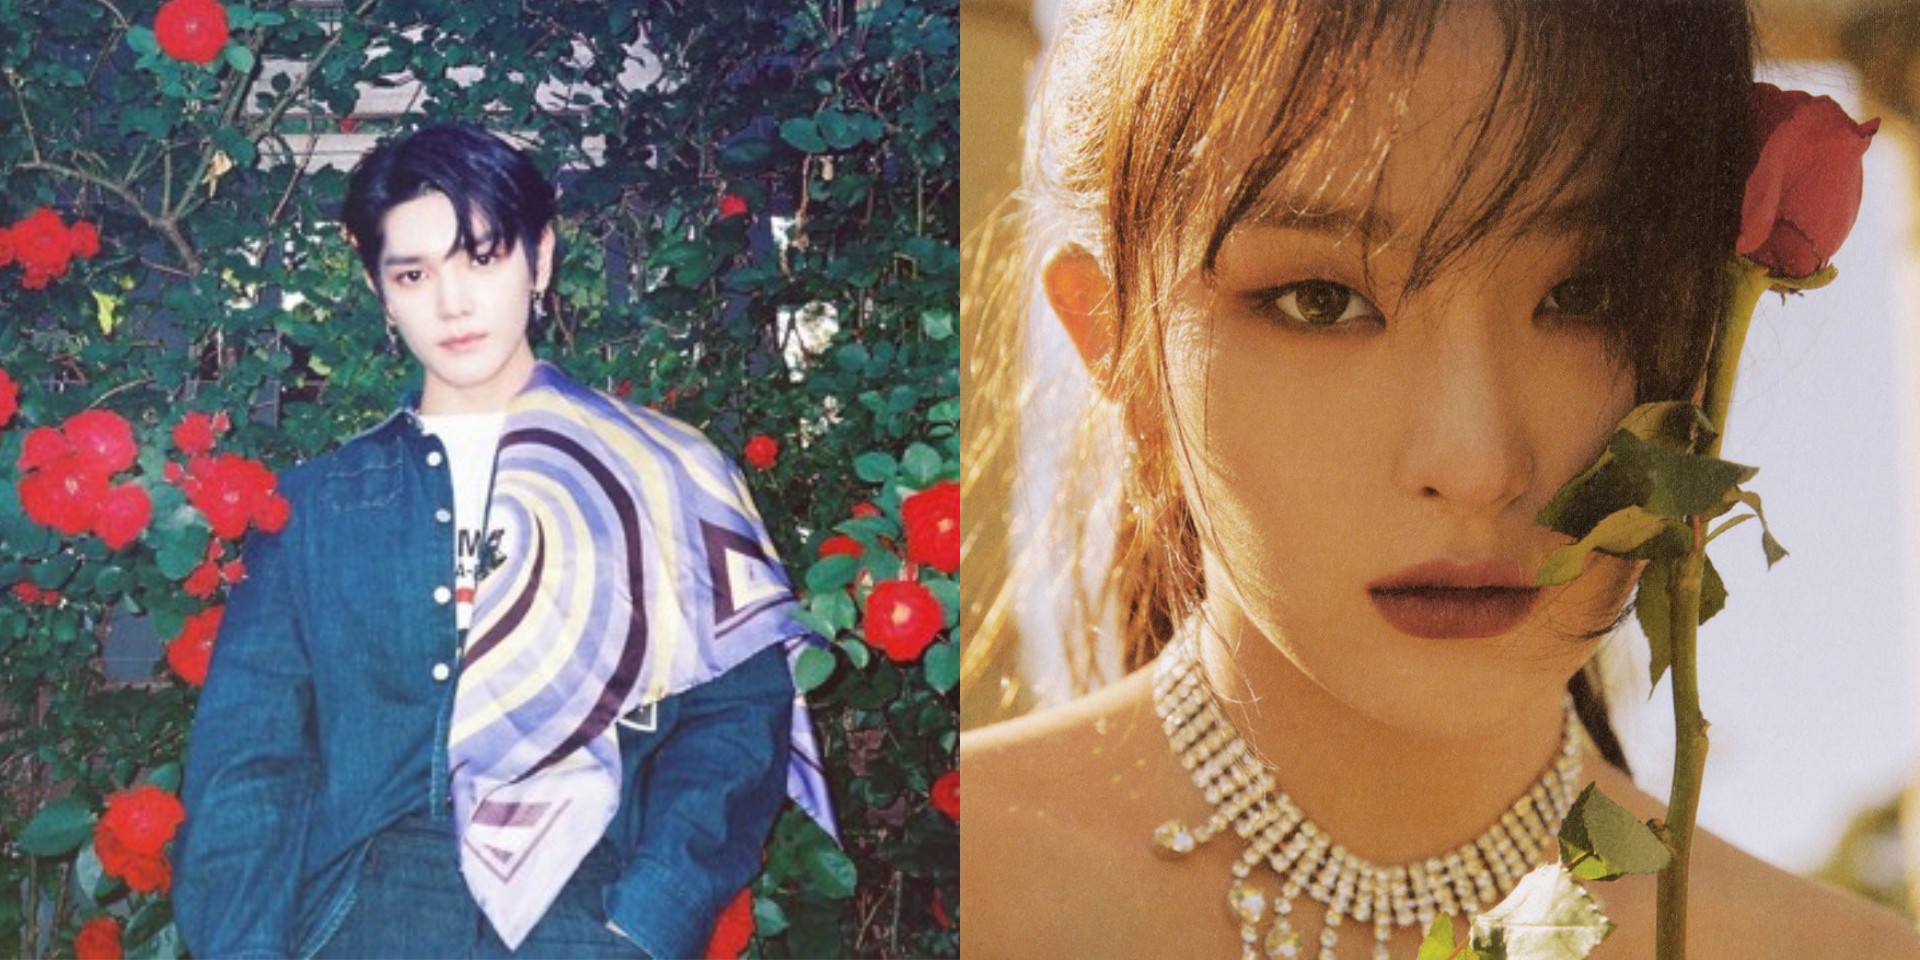 NCT's Taeyong and Red Velvet's Seulgi drop collaborative track 'Rose' – listen